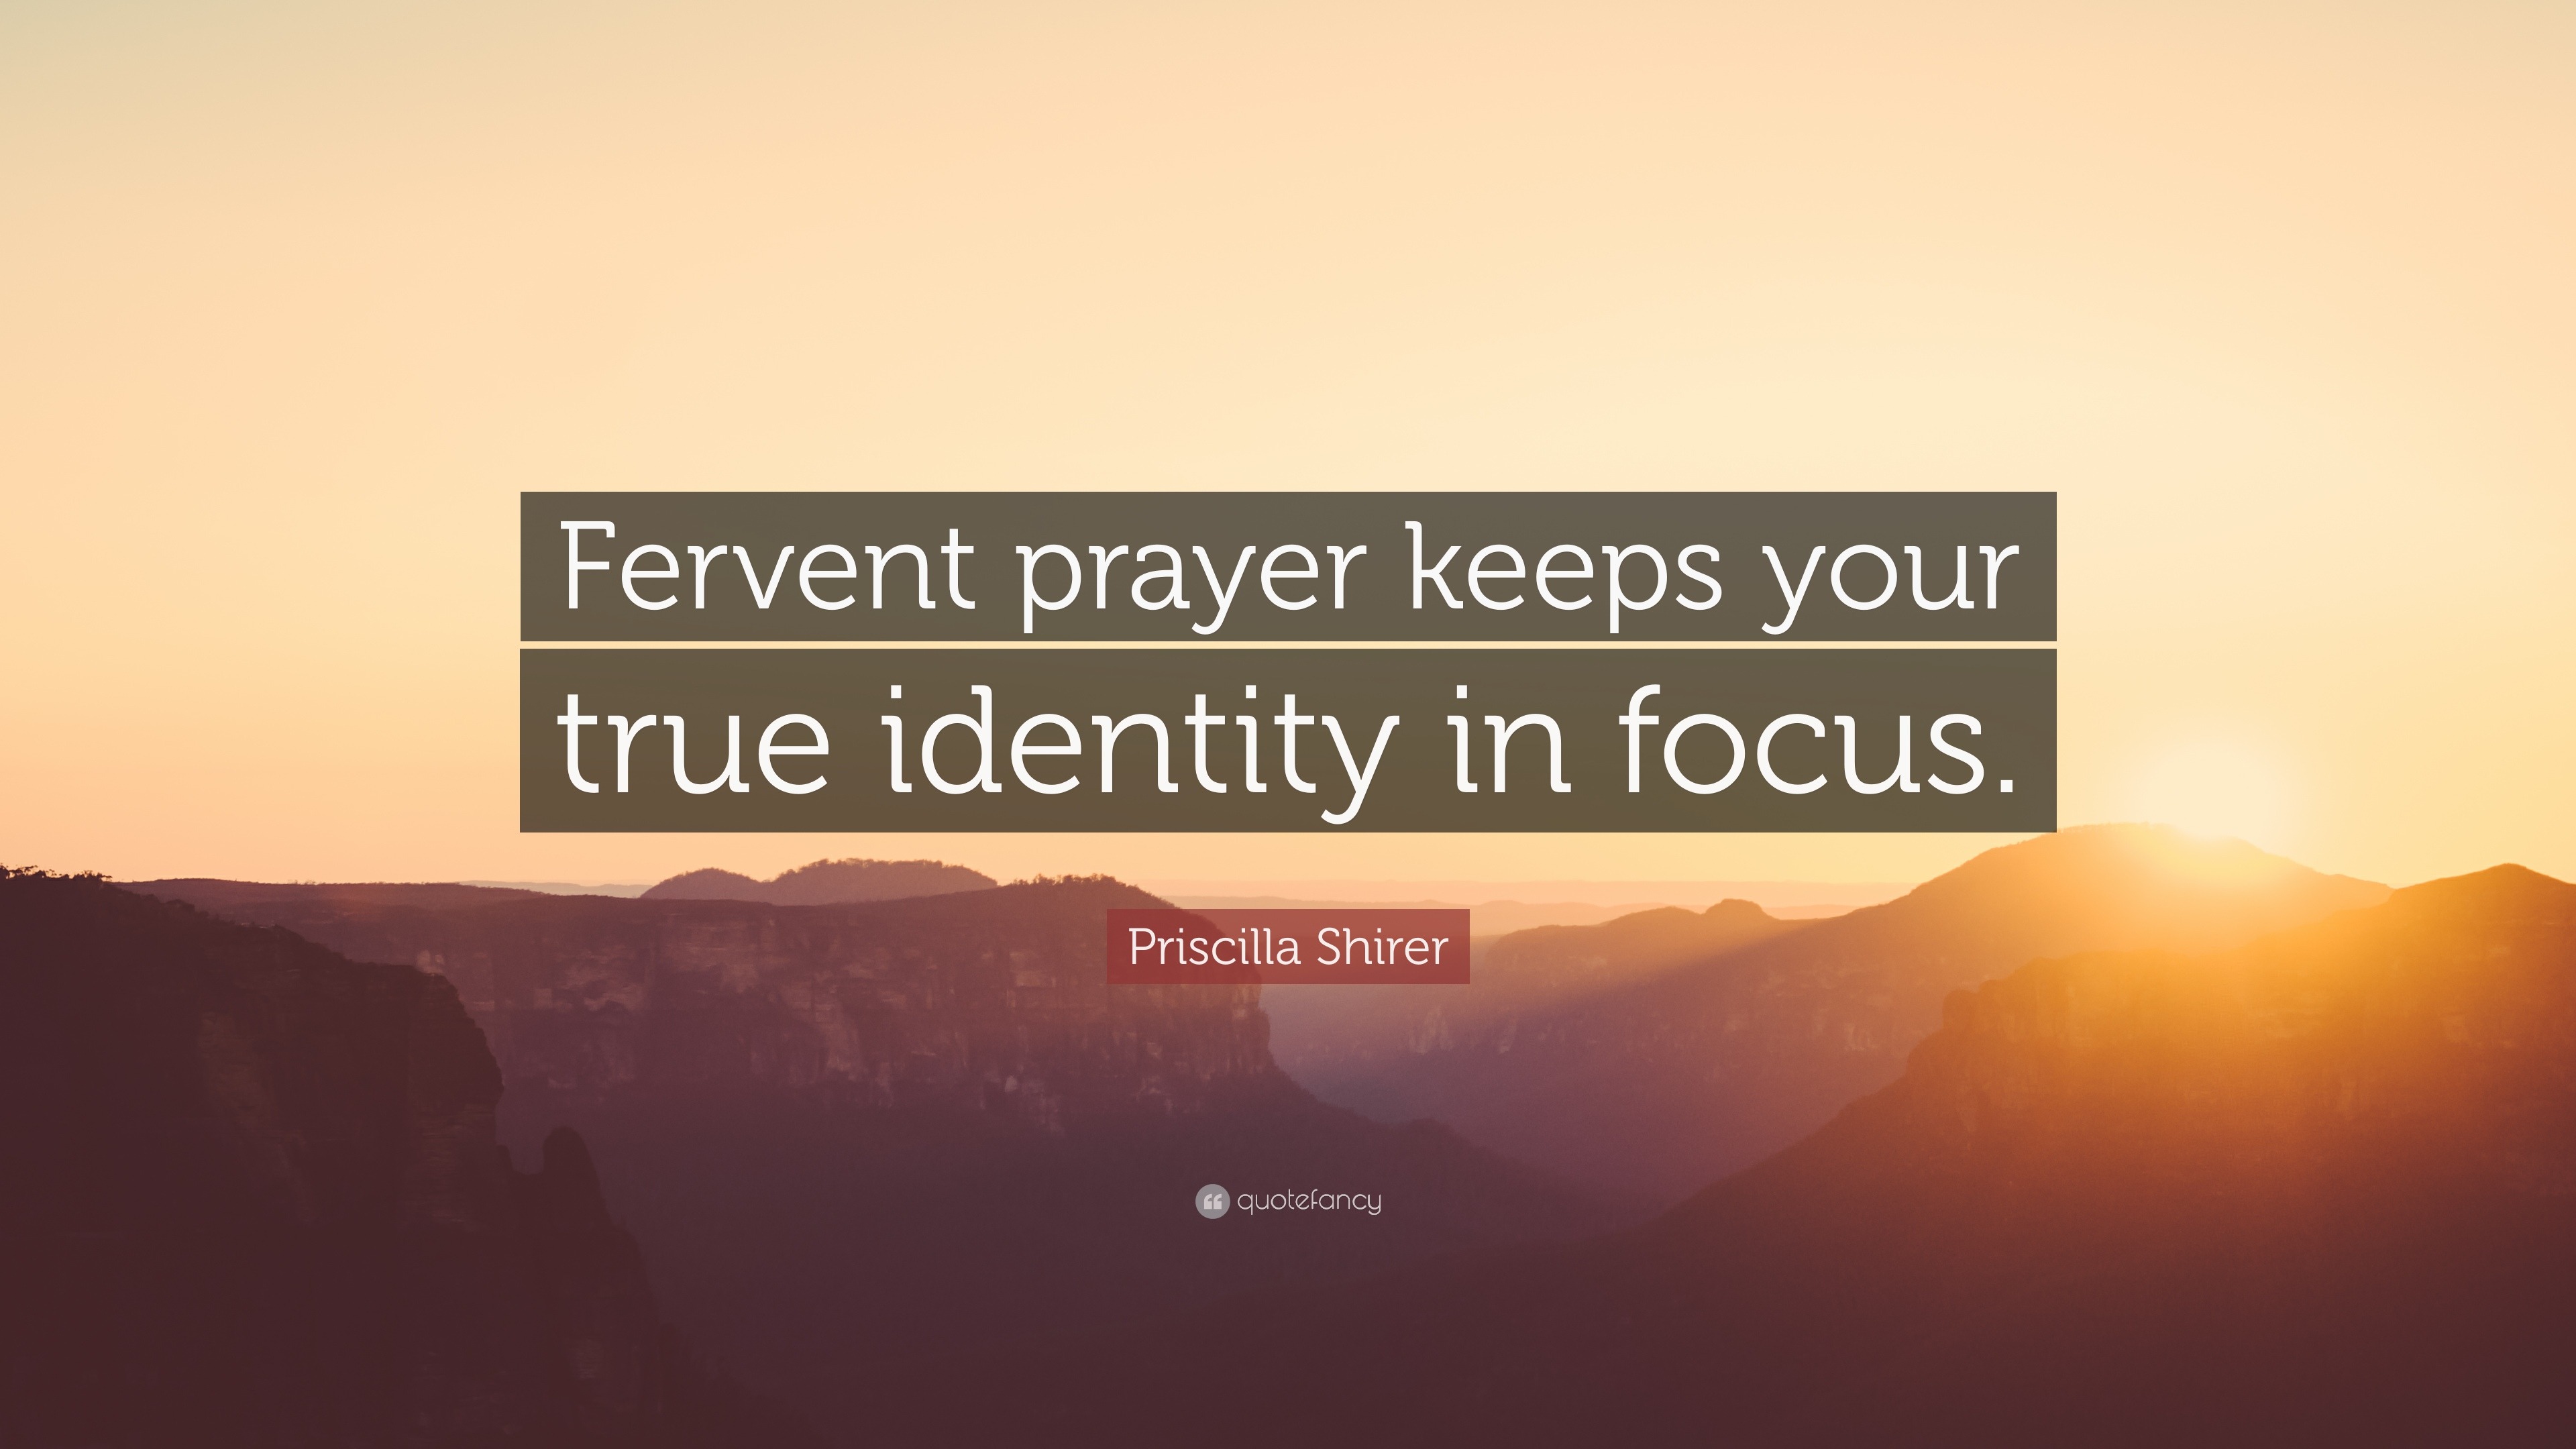 Fervent by Priscilla Shirer